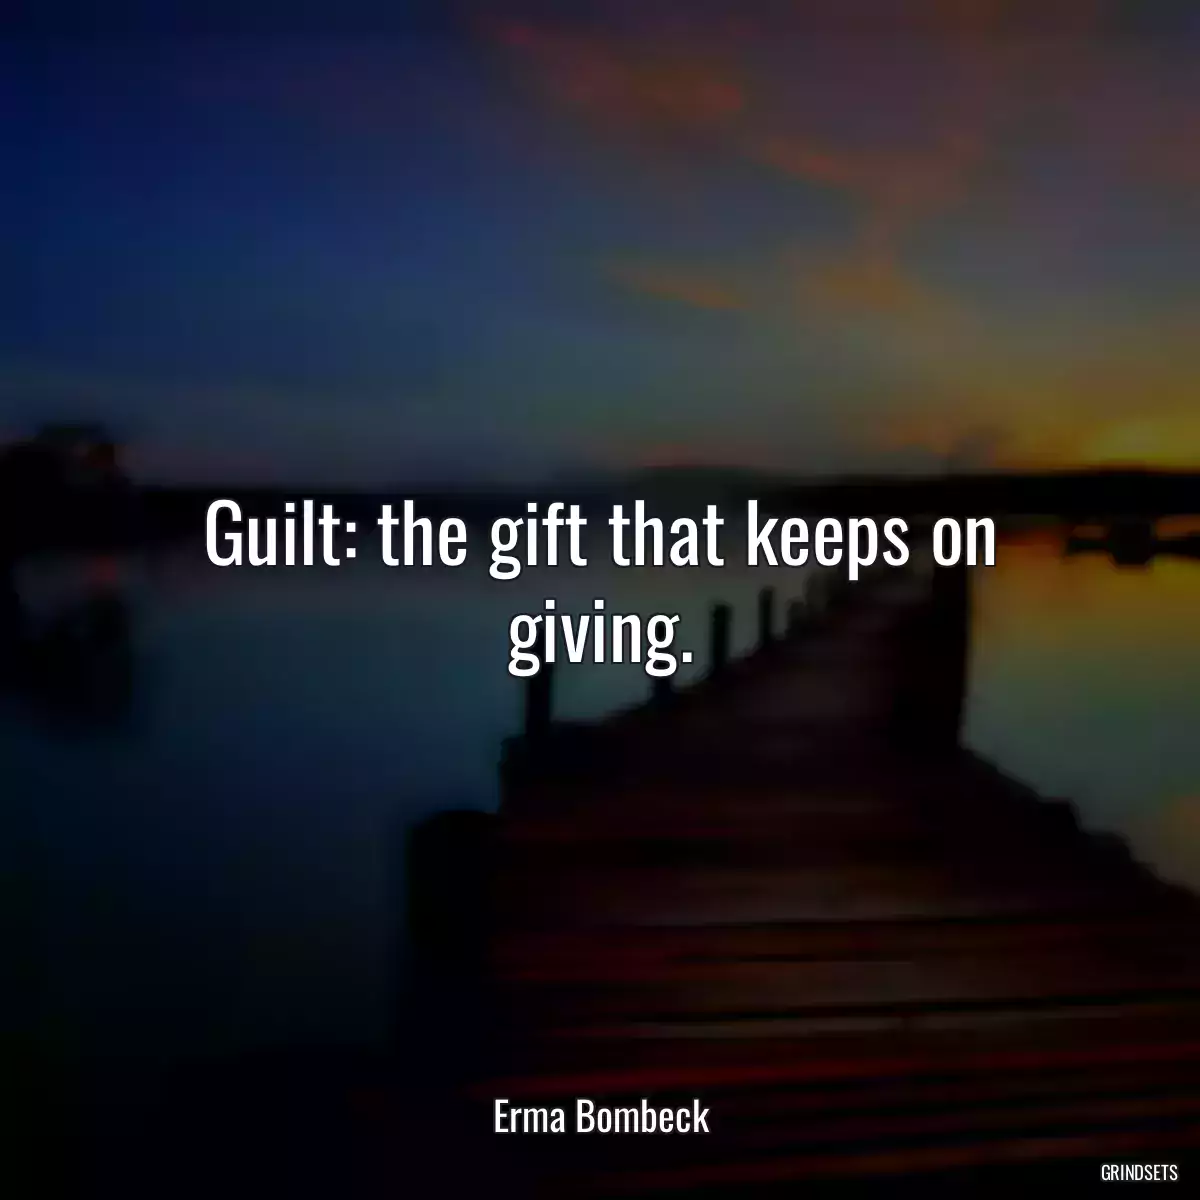 Guilt: the gift that keeps on giving.